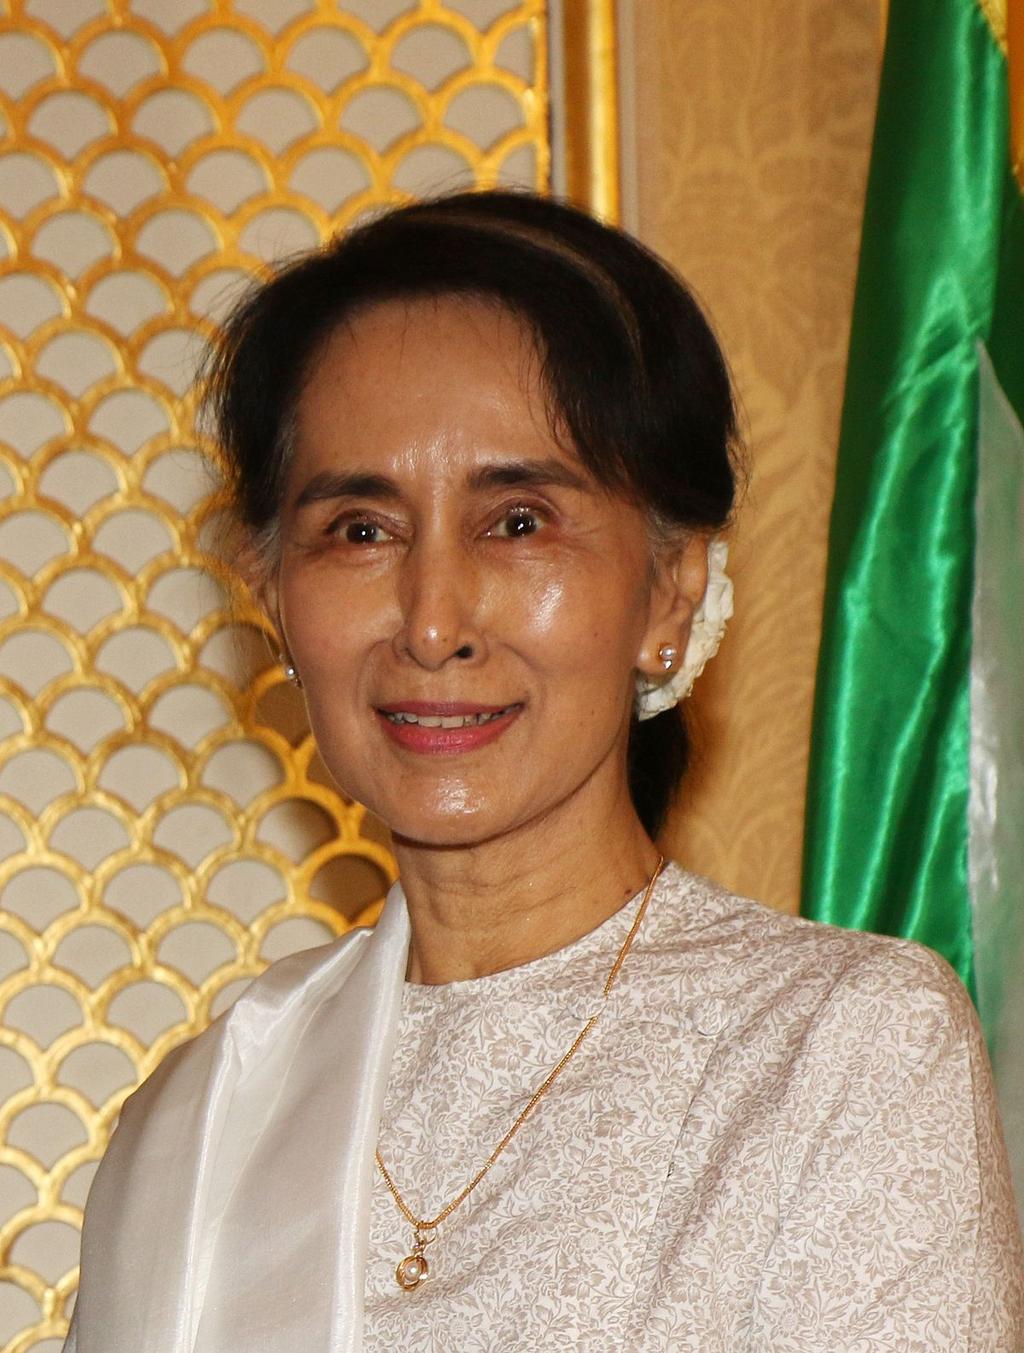 Current Day Myanmar Economic & Political Overview Economic Overview Underdeveloped in infrastructure, face a heroin/opium crisis, but are a high growth country - No signs that the Rohingya crisis has